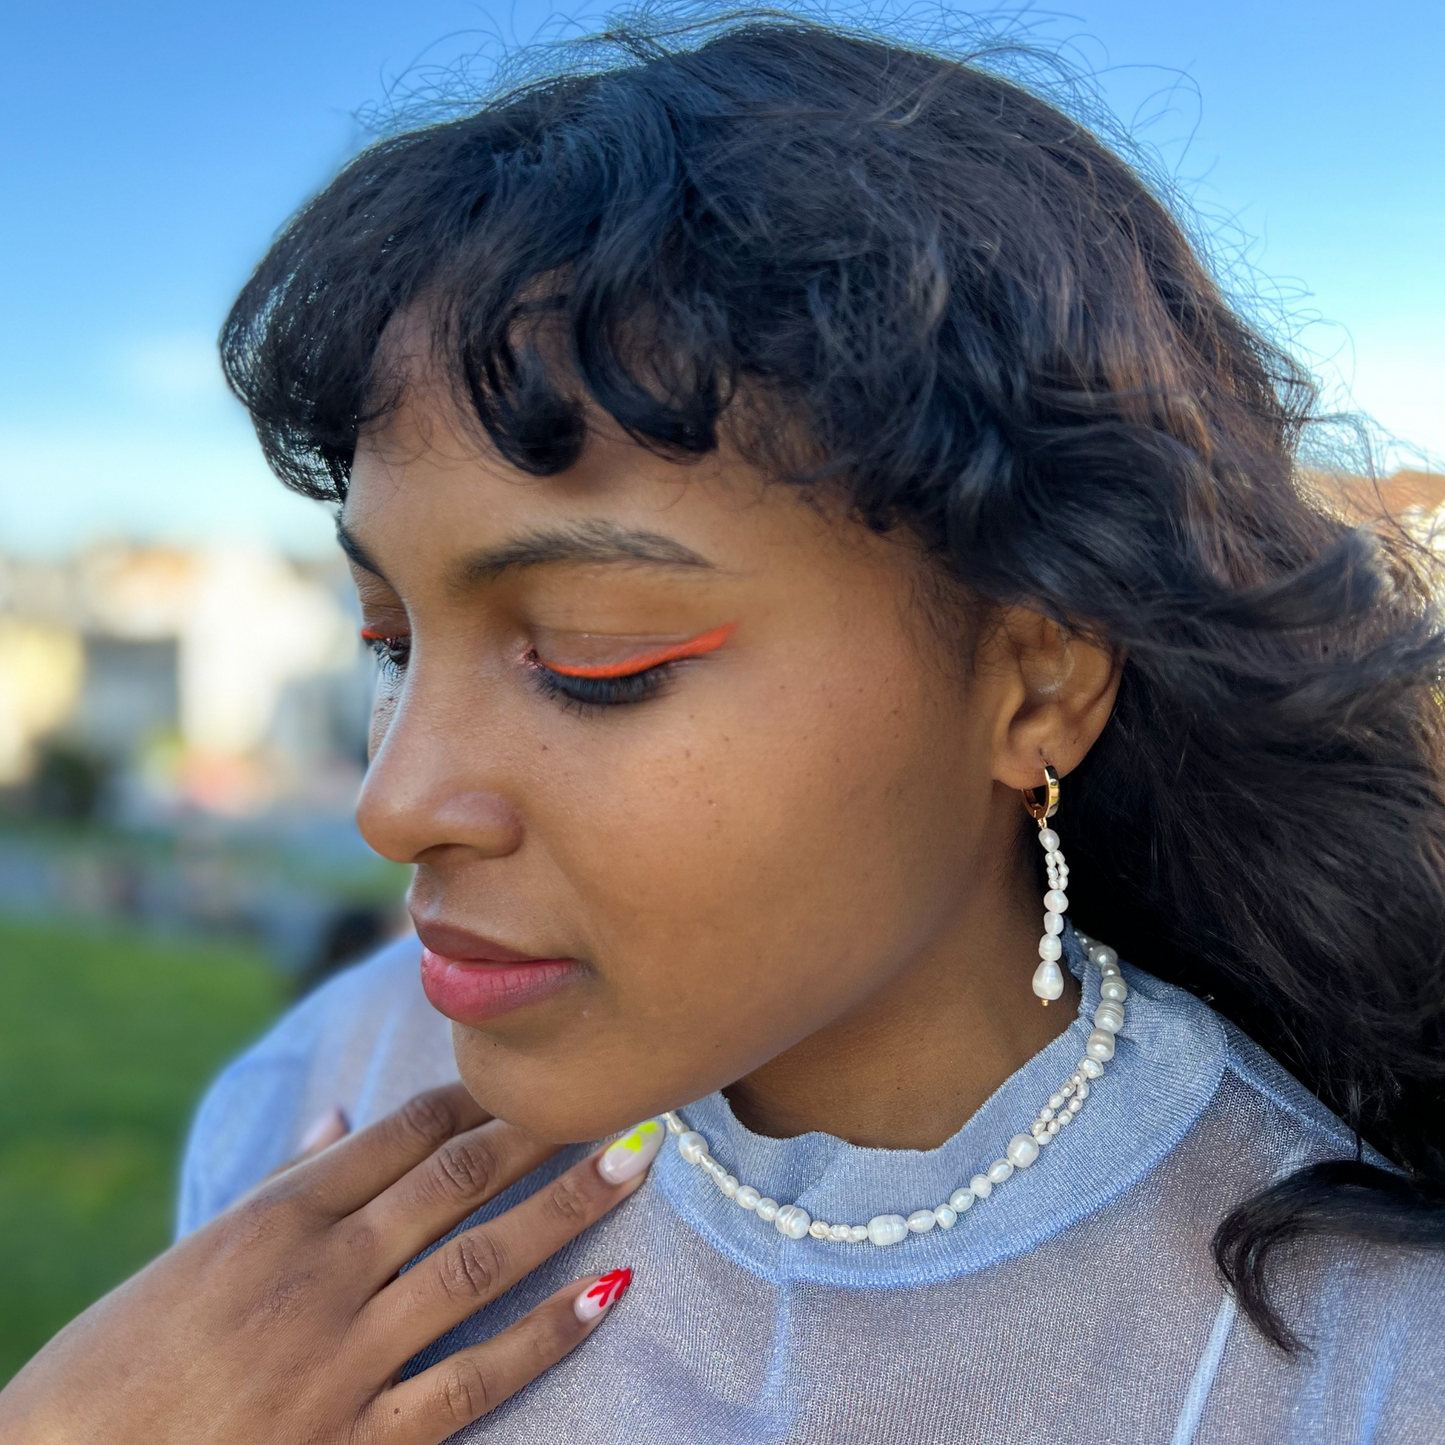 Roop Jewelry mélange pearl earrings. Freshwater pearl earrings. Spring 2022 jewelry trends. Summer 2022 jewelry trends. Spring 2022 aesthetic. Summer 2022 aesthetic. Jewelry styled on Danielle Meulens. Painted ladies in Alamo Square Park.